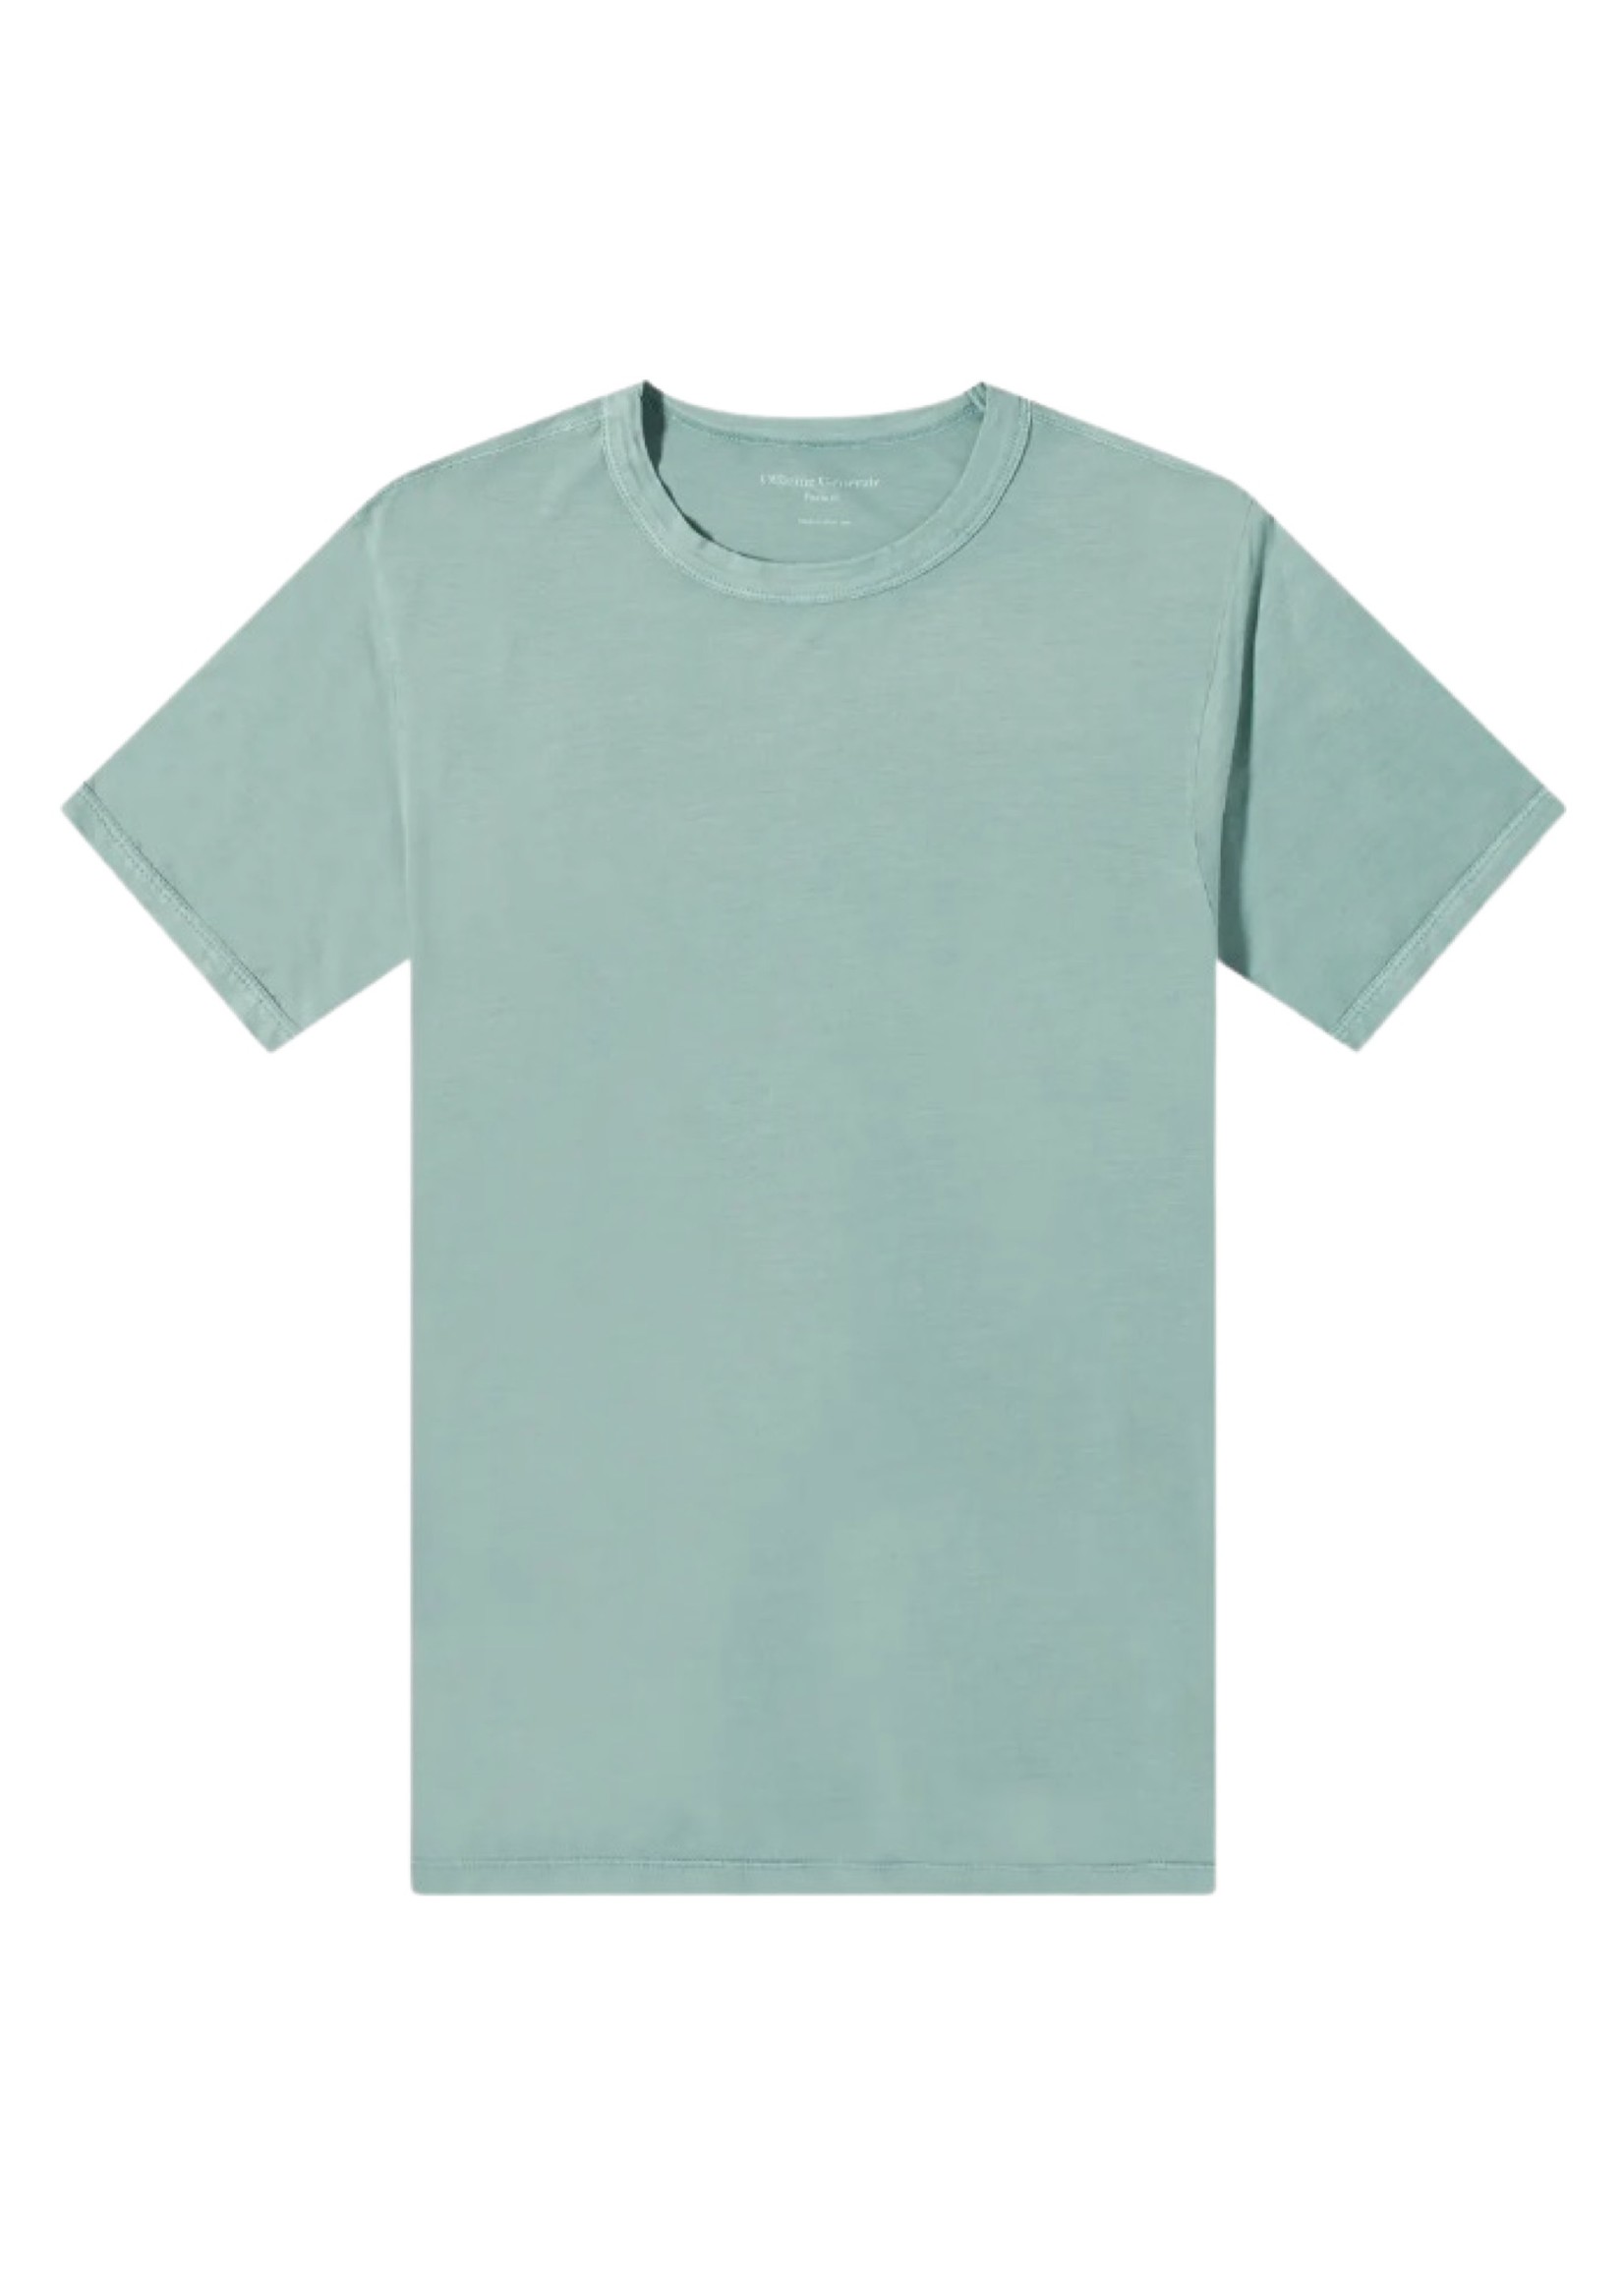 OFFICINE GENERALE PIGMENT DYED T-SHIRT IN COTTON TENCEL